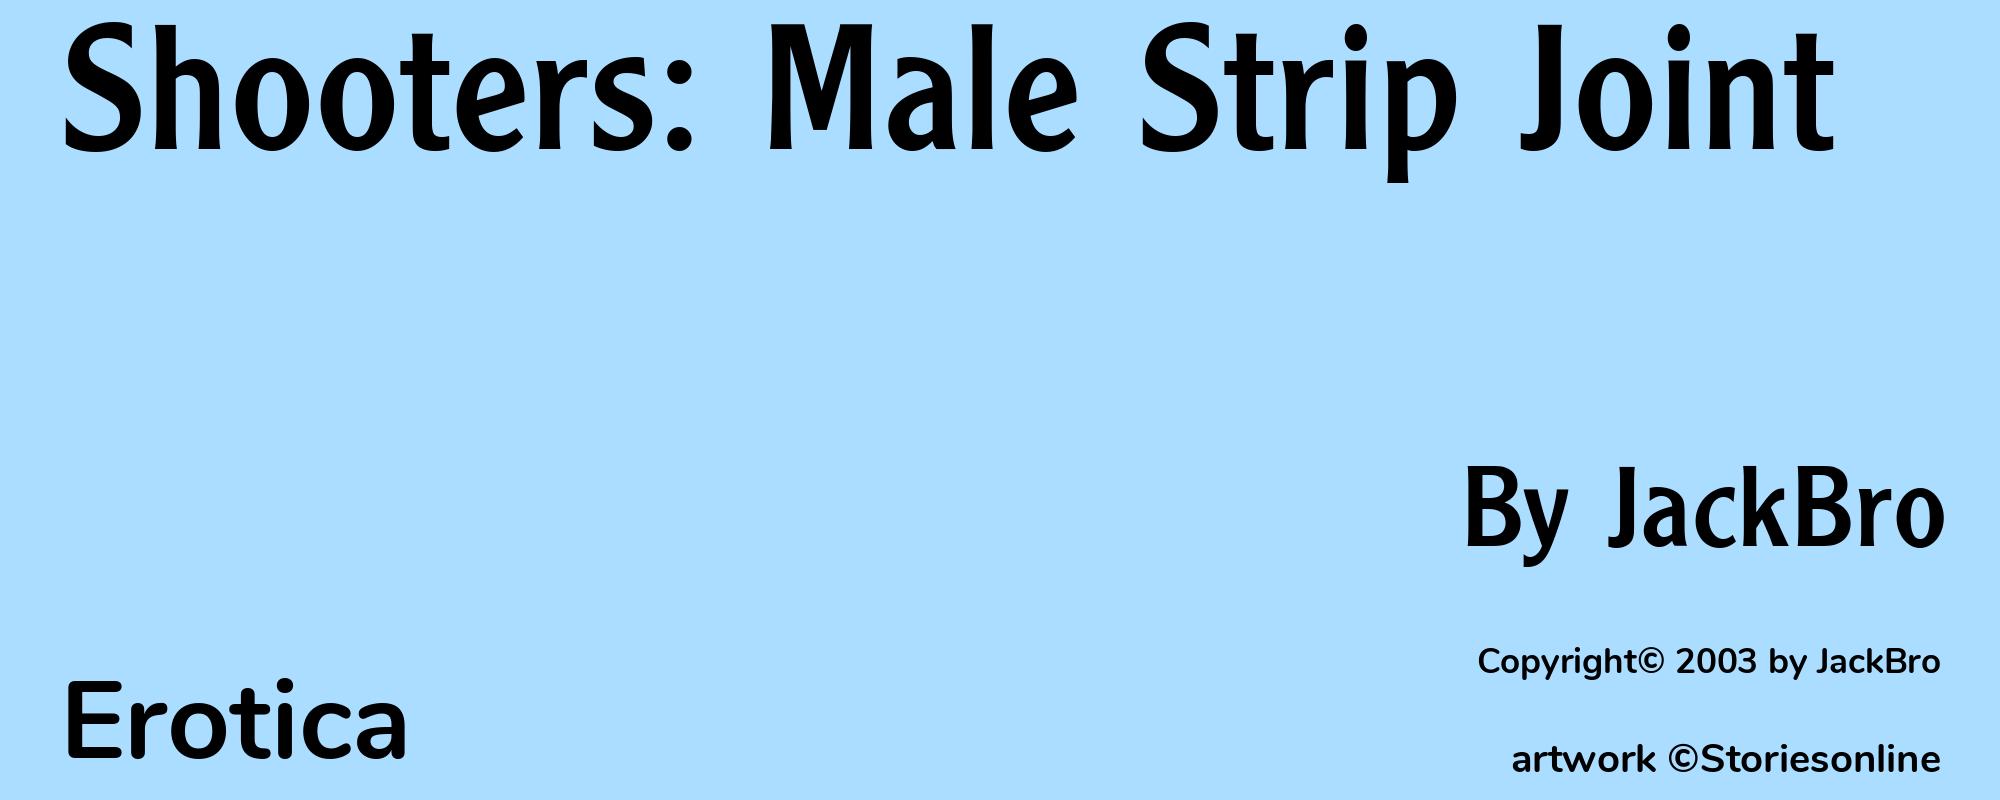 Shooters: Male Strip Joint - Cover